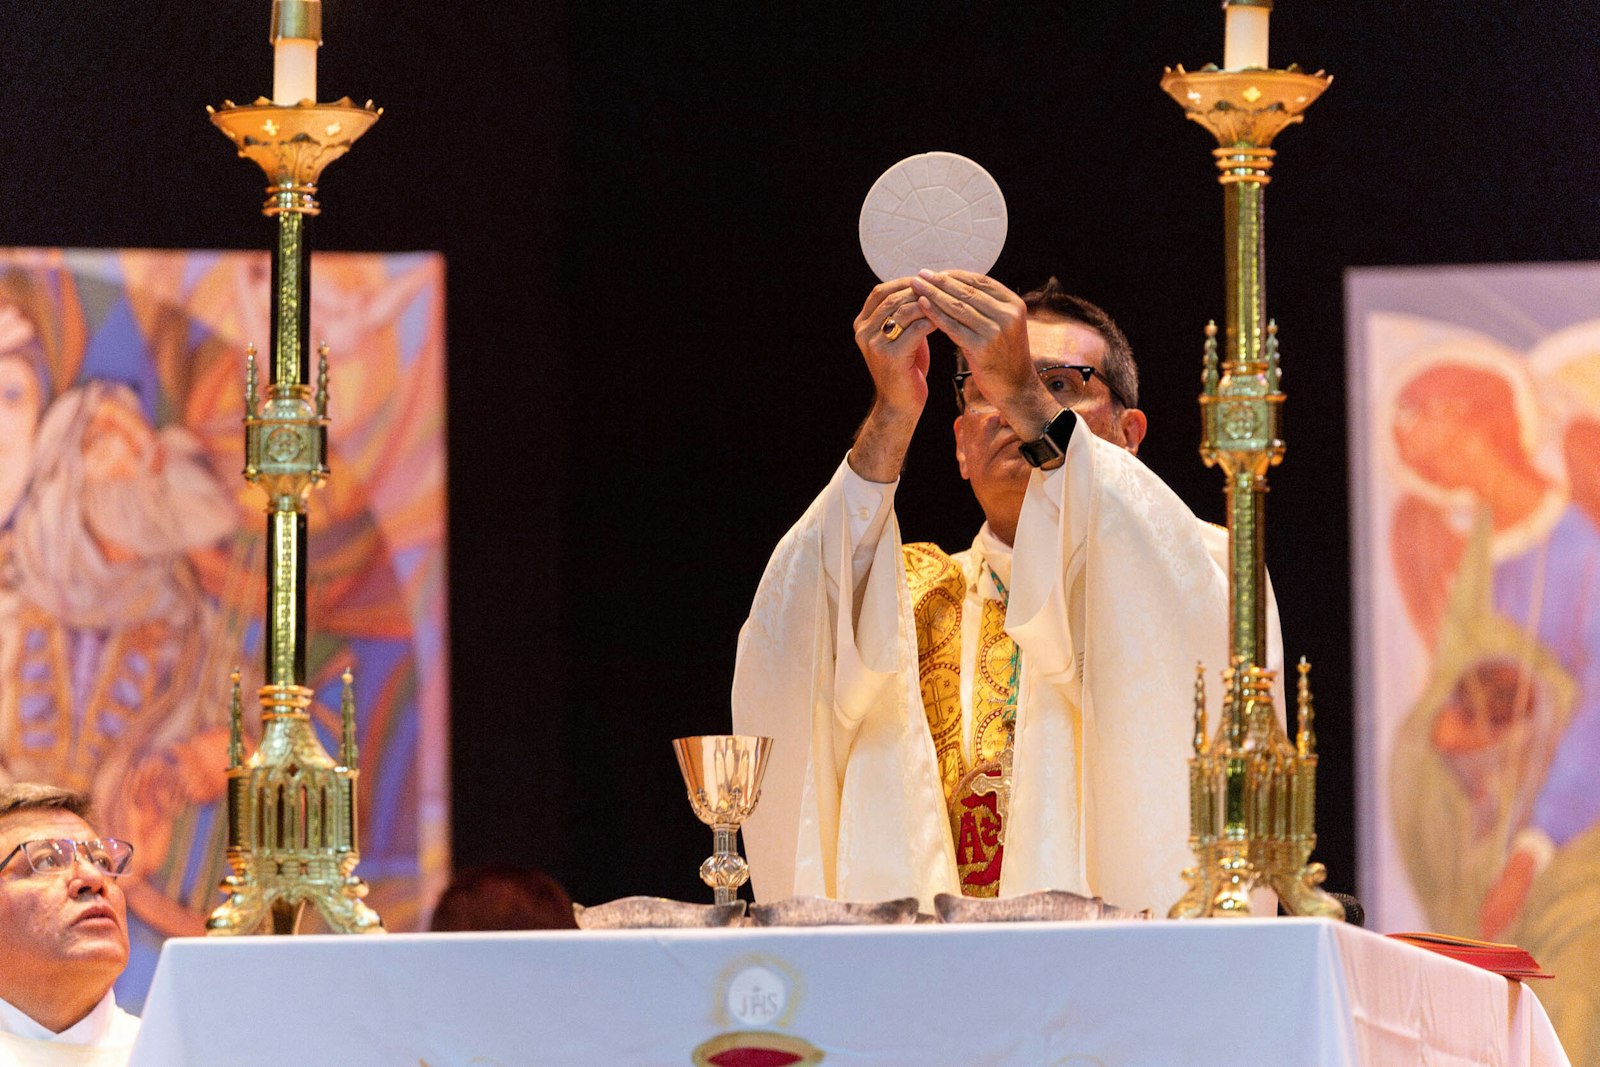 To conclude the conference, Detroit Auxiliary Bishop Arturo Cepeda presided over a moving Mass that served as the highlight of the event, reaffirming the participants' commitment to the Catholic faith and their desire for spiritual growth.